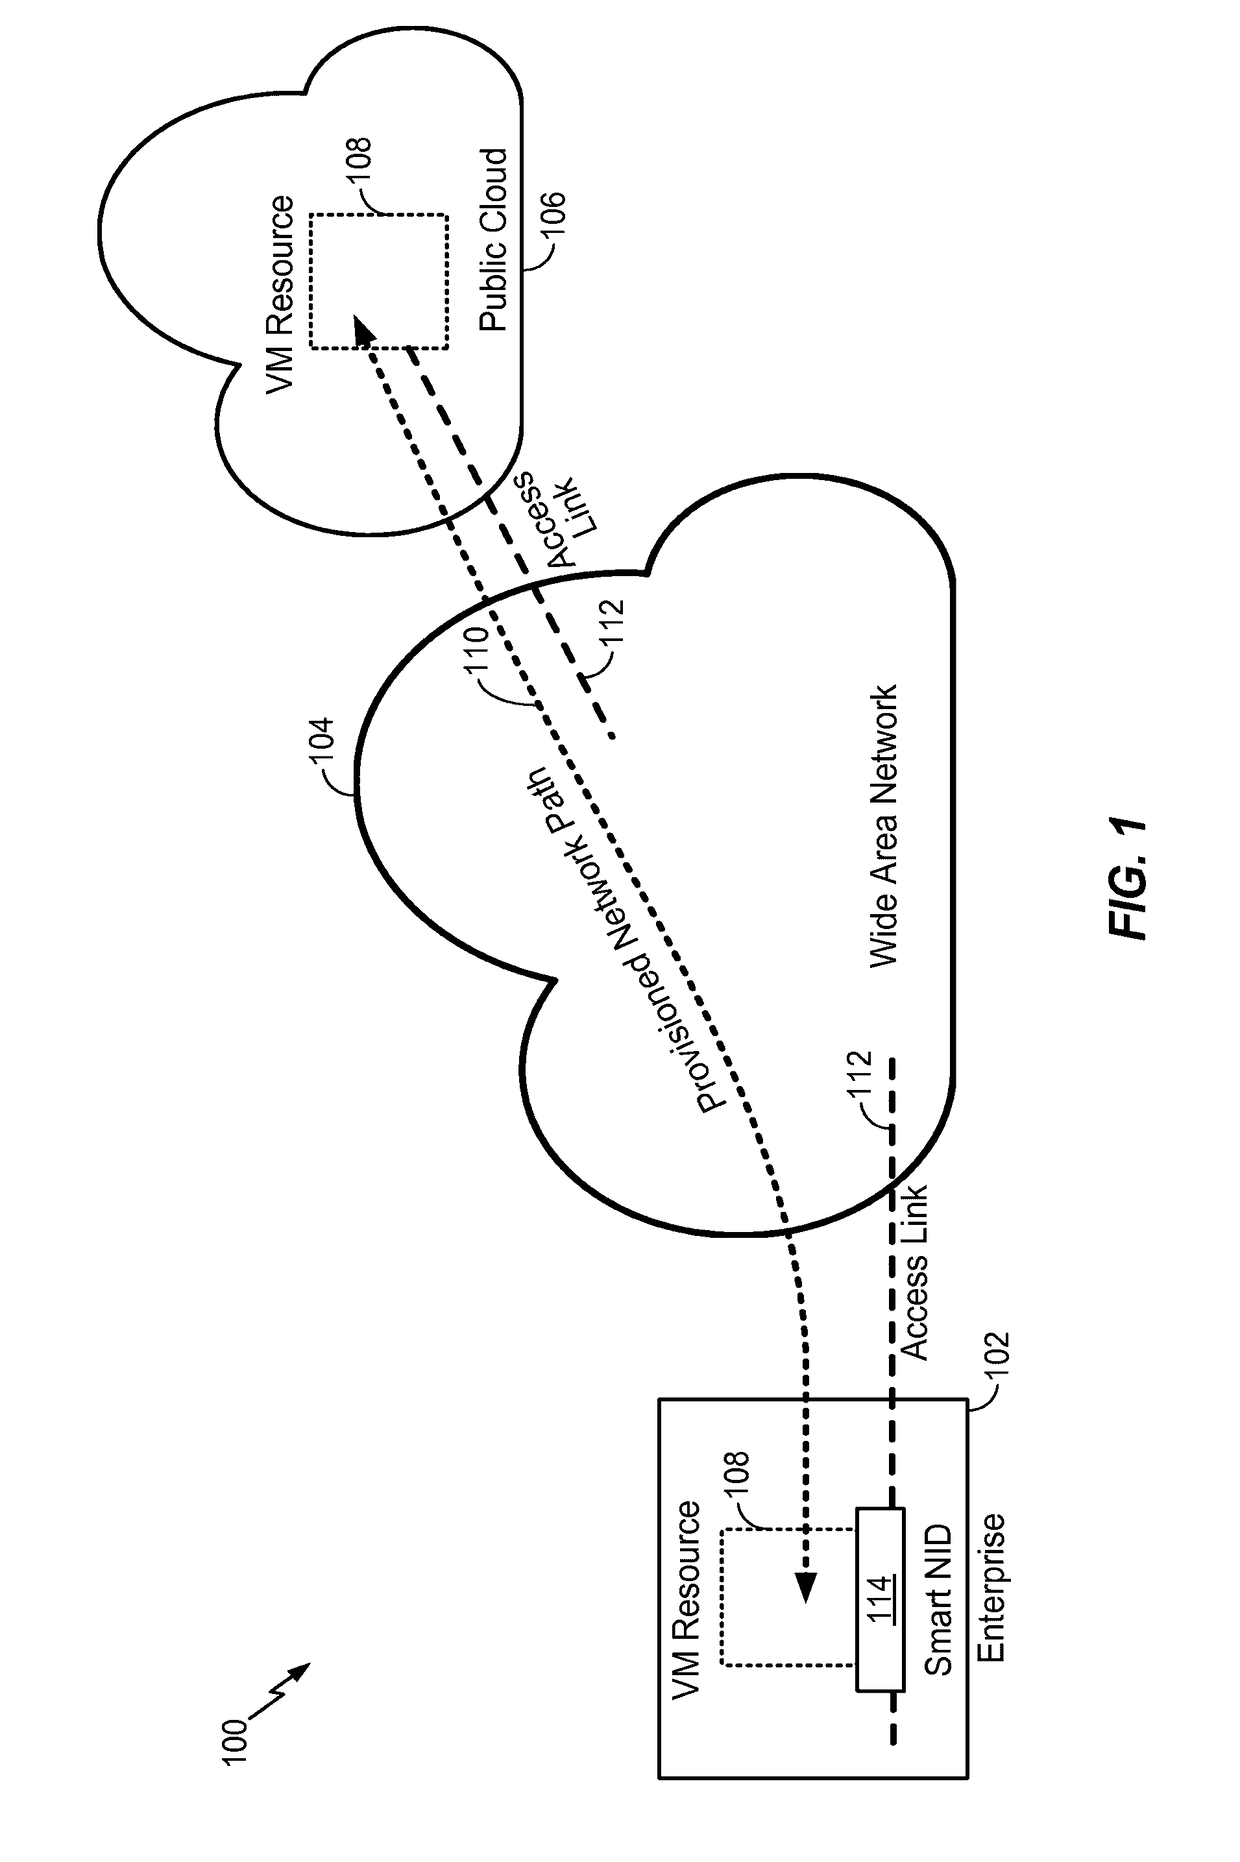 Method and apparatus for provisioning virtual network functions from a network service provider